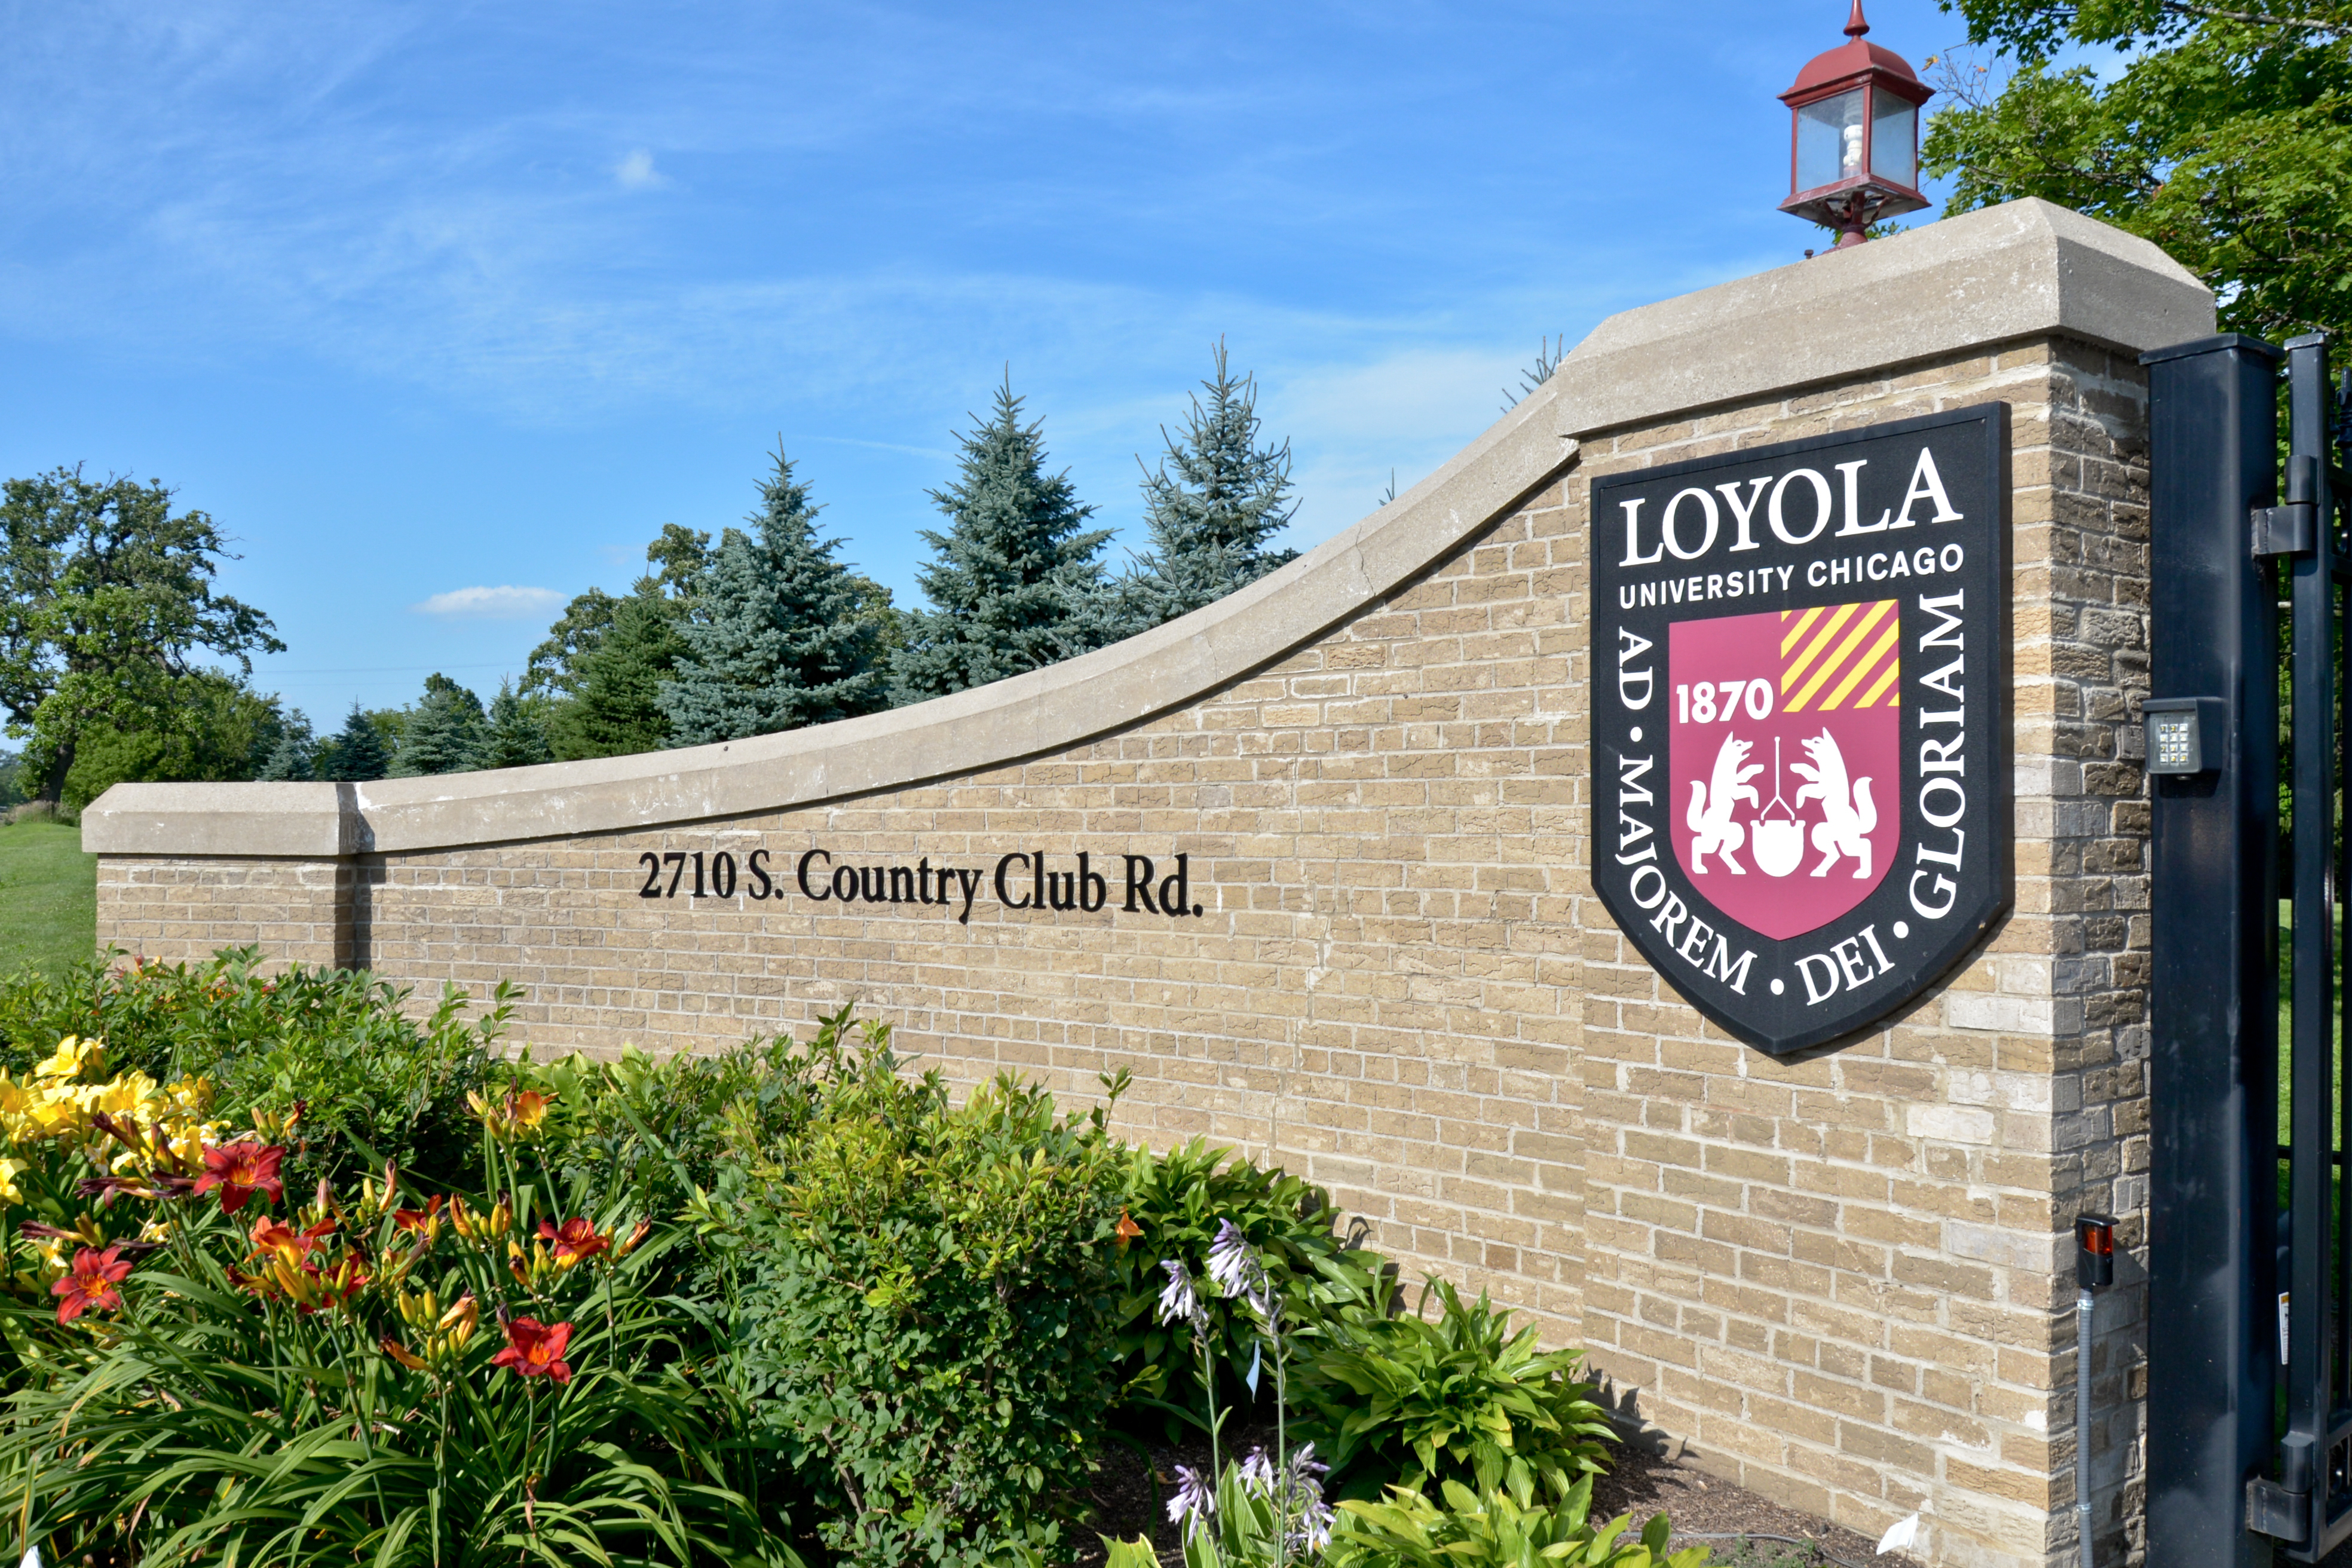 
Visit Loyola's Retreat and Ecology Campus